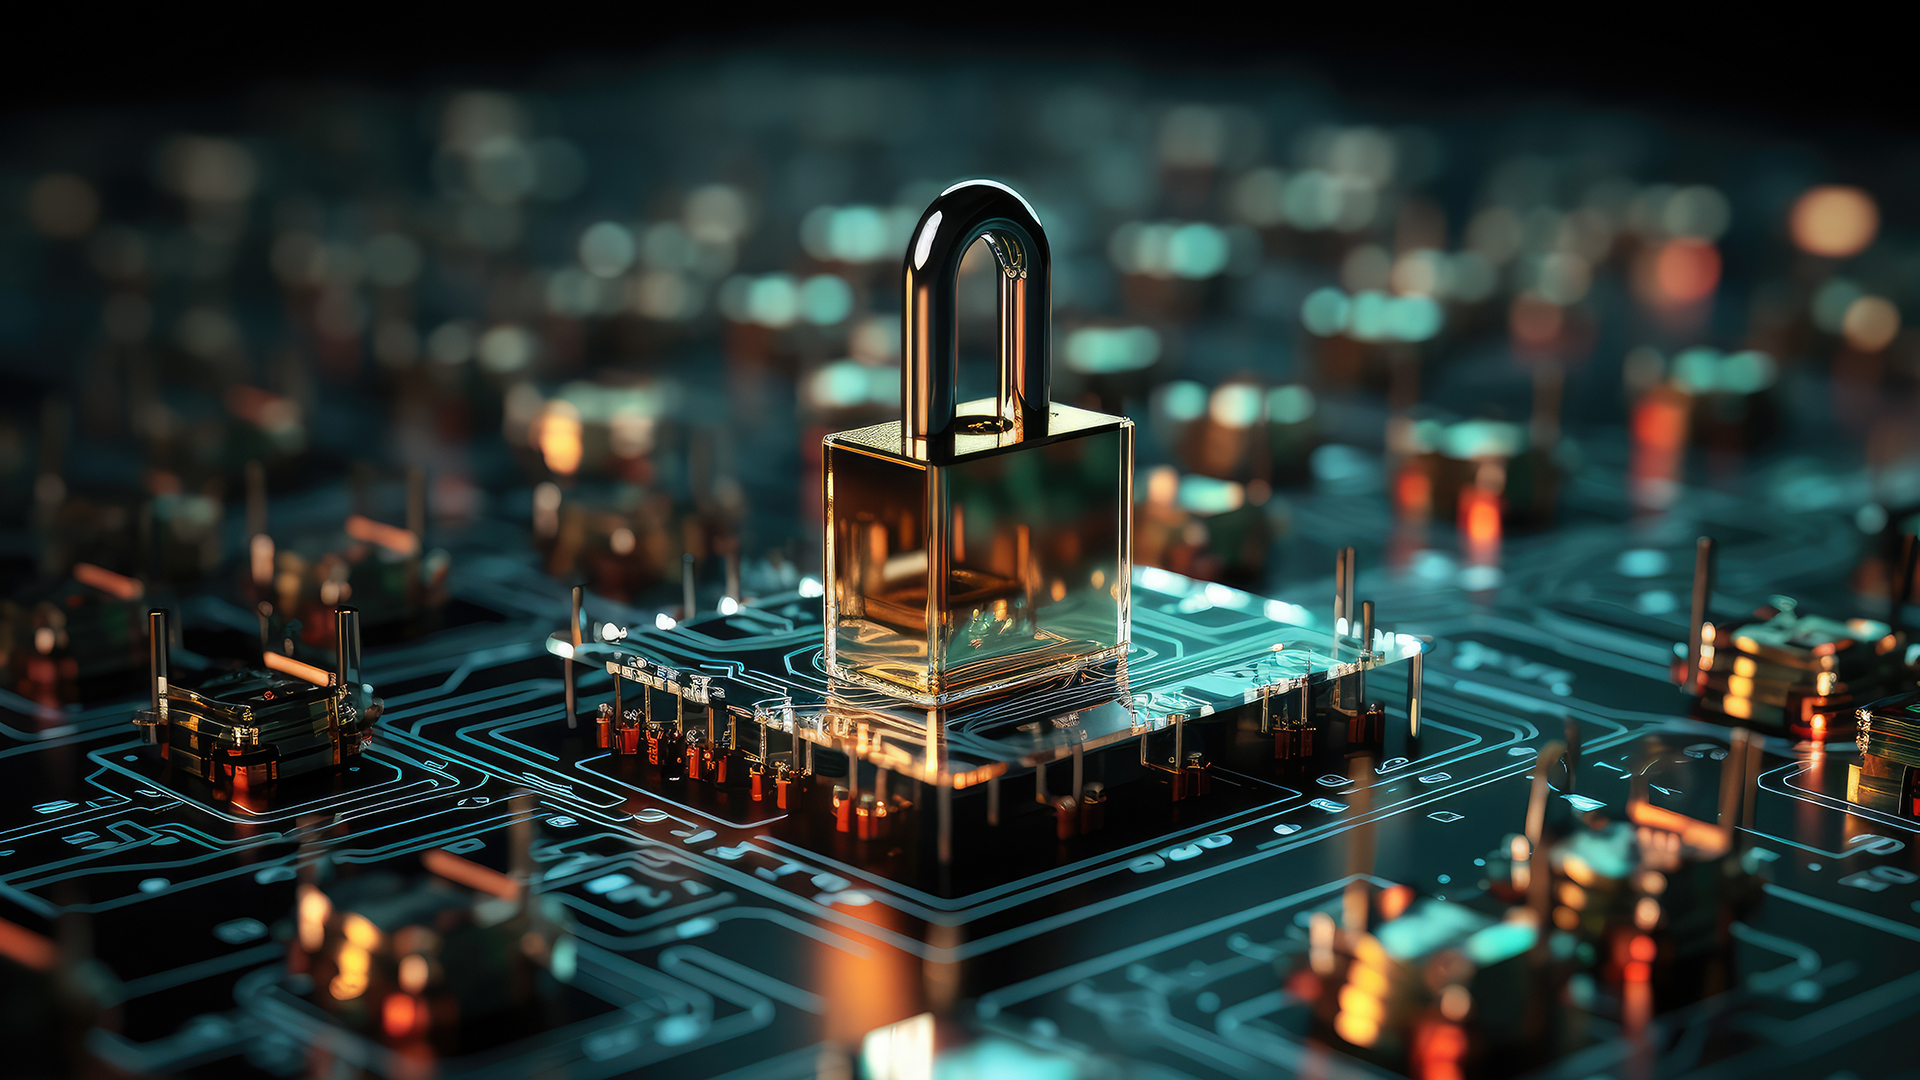 Symbolic image of a padlock on a circuit board representing cyber security